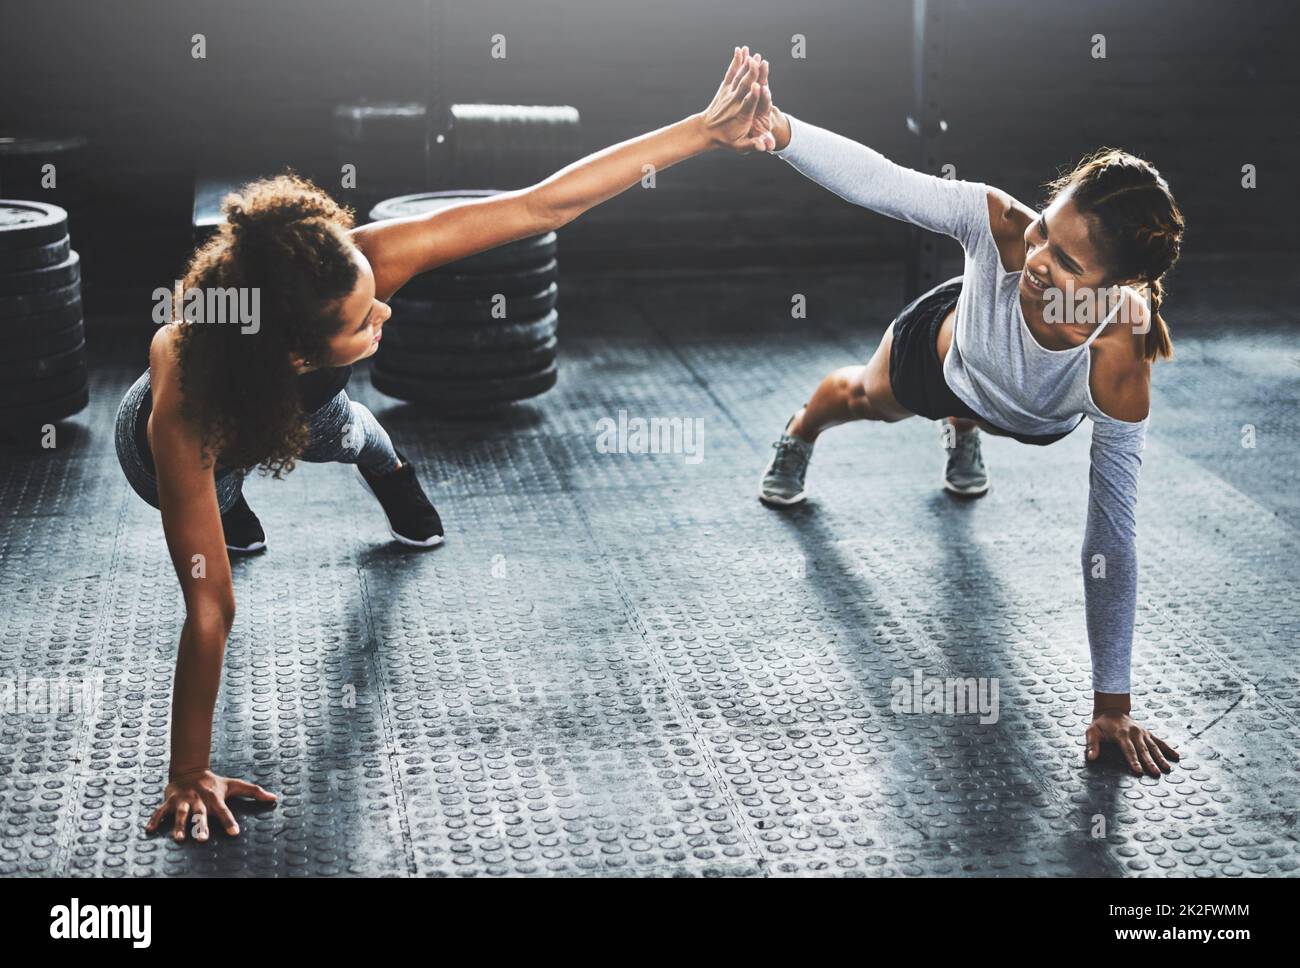 Bring your best friend and give it your best. Shot of two young women giving each other a high five while doing push ups at the gym. Stock Photo